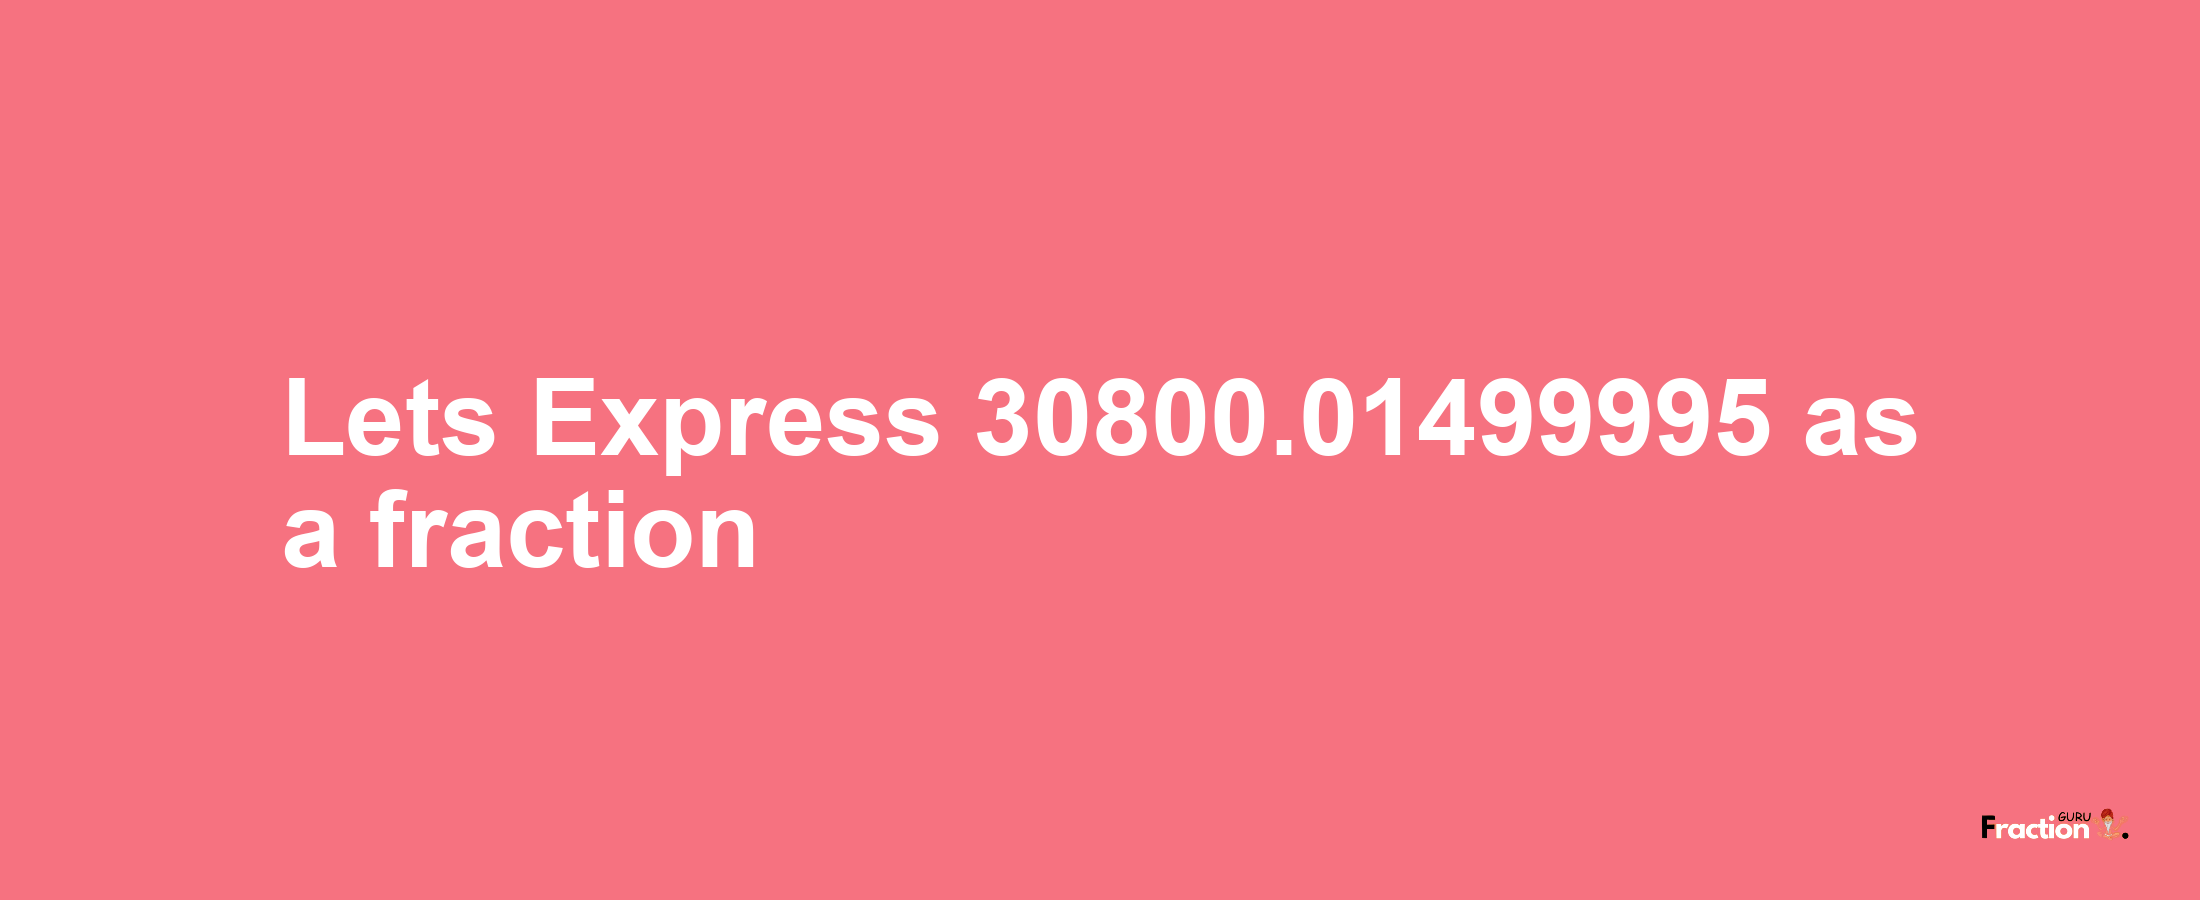 Lets Express 30800.01499995 as afraction